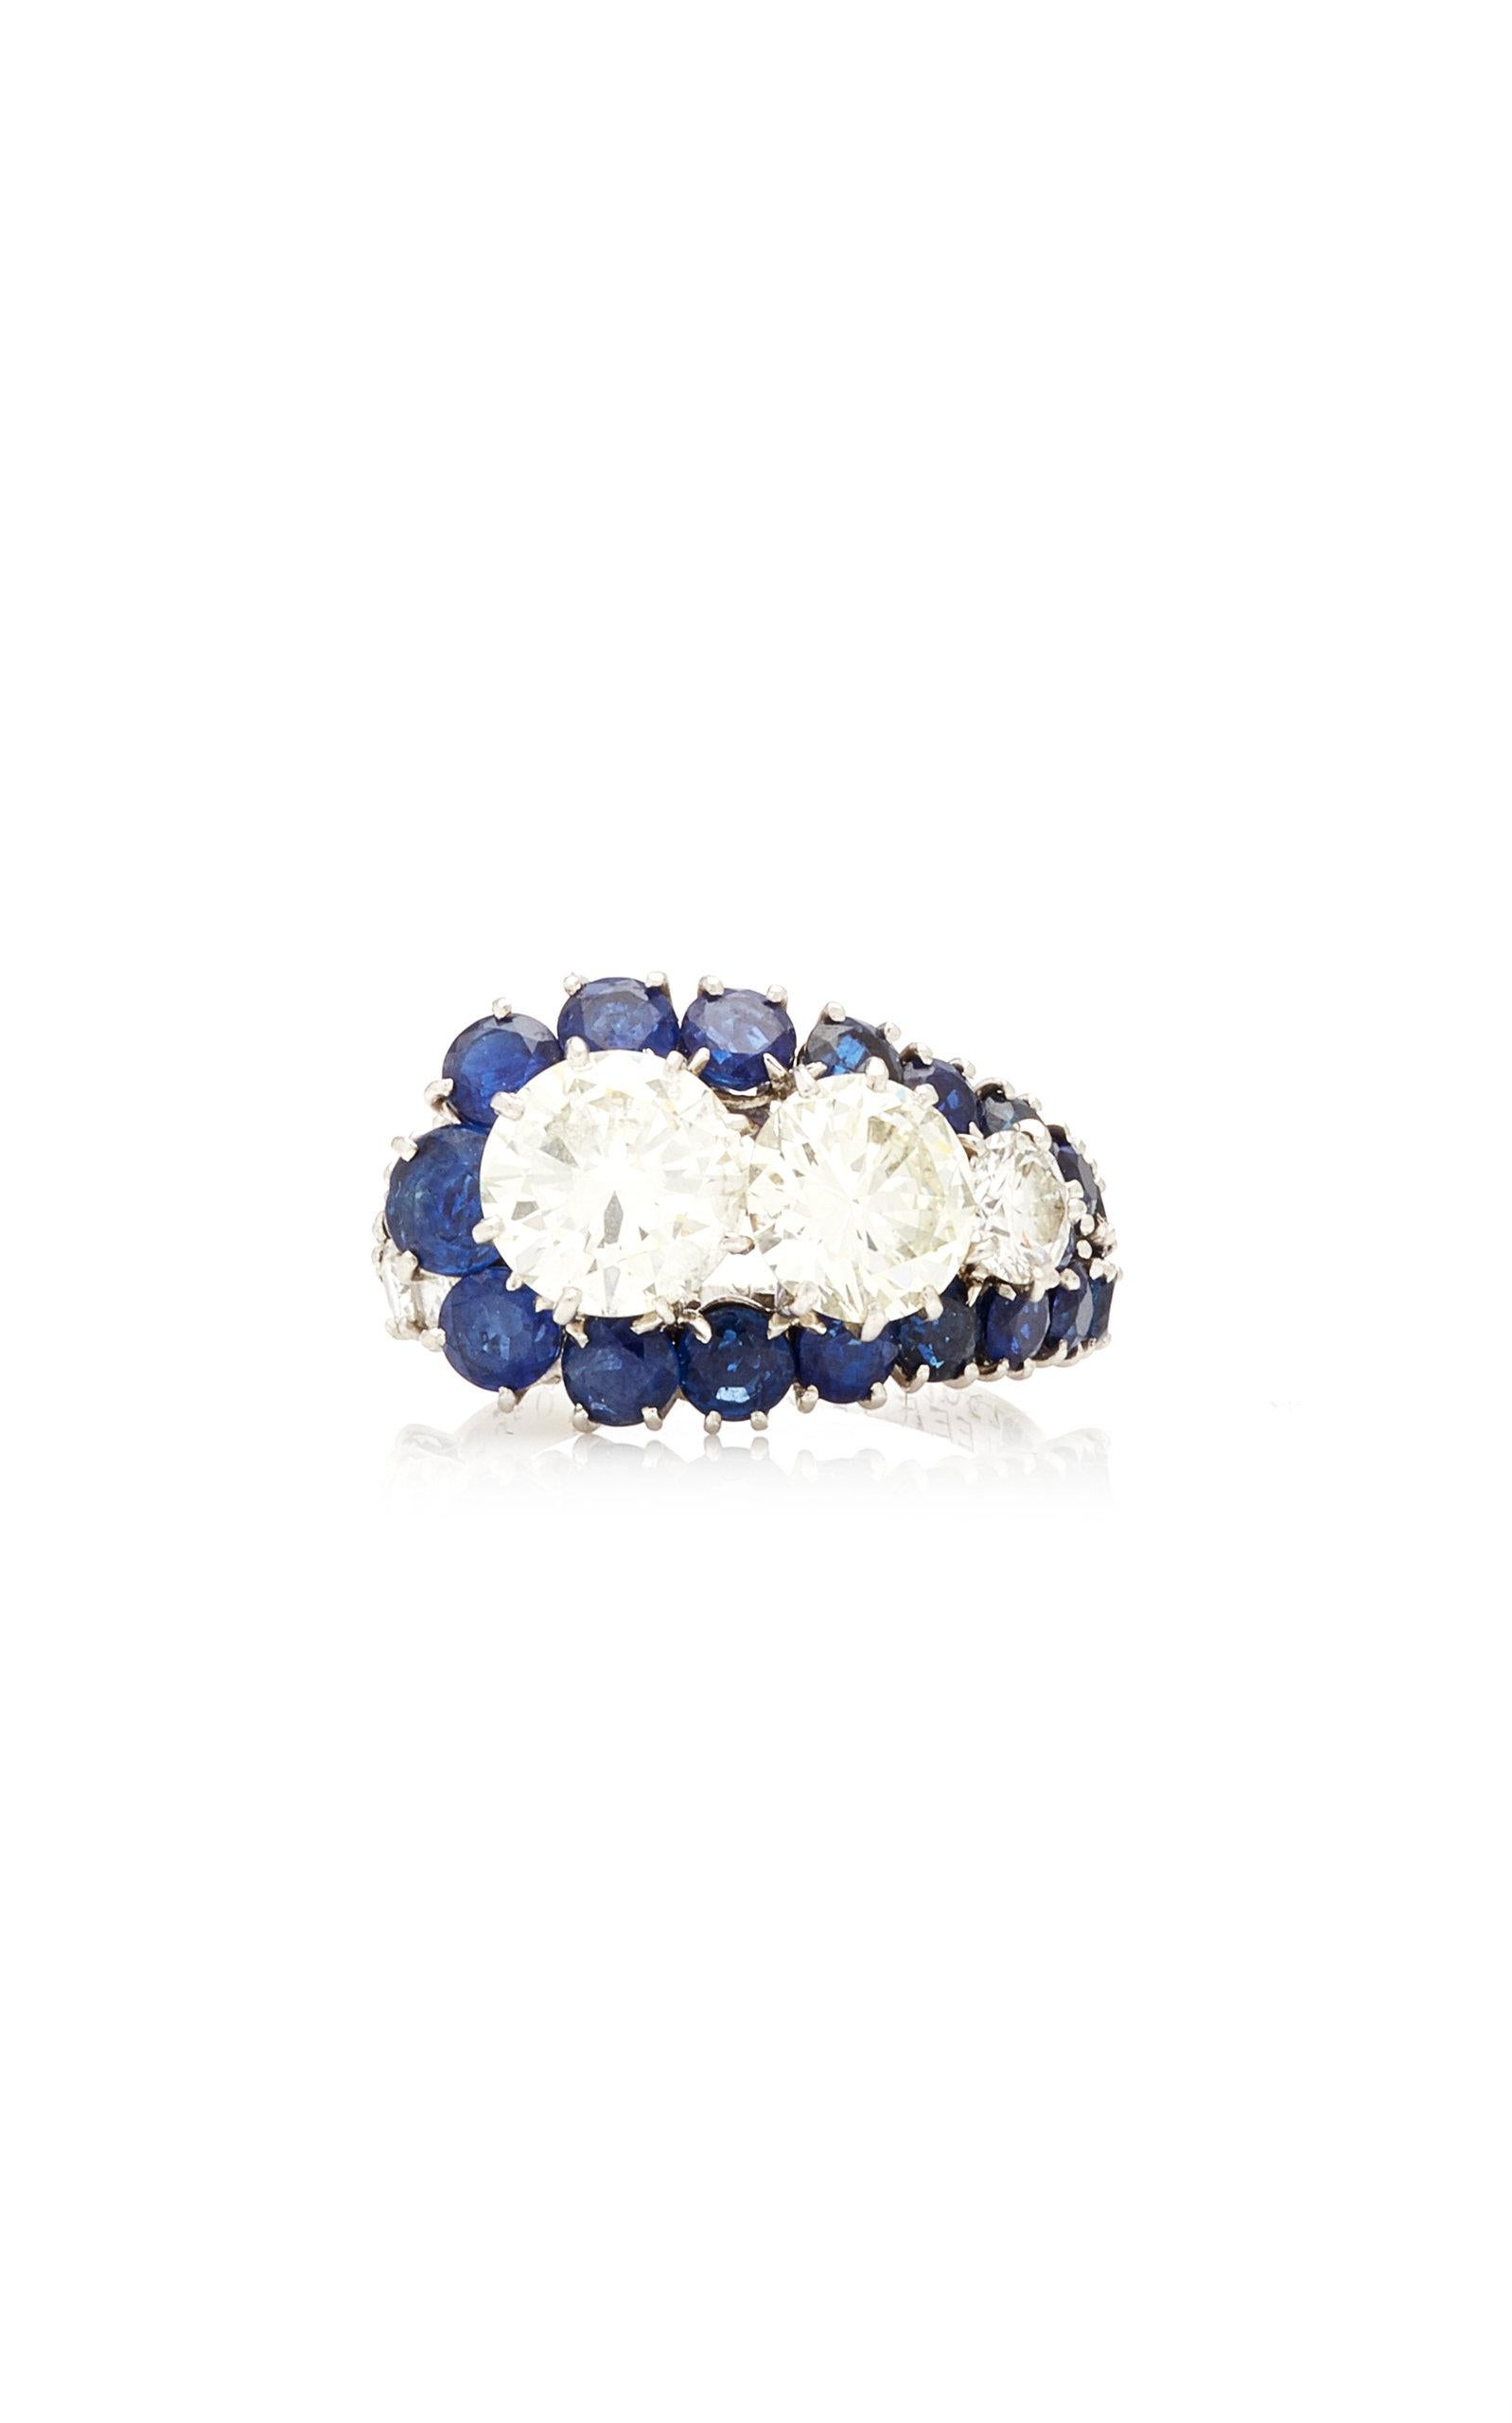 Van Cleef & Arpels ring in white gold with 3 diamonds (respectively 0.5, 1.5, and 2 cts) and sapphires. Made in France, circa 1950 